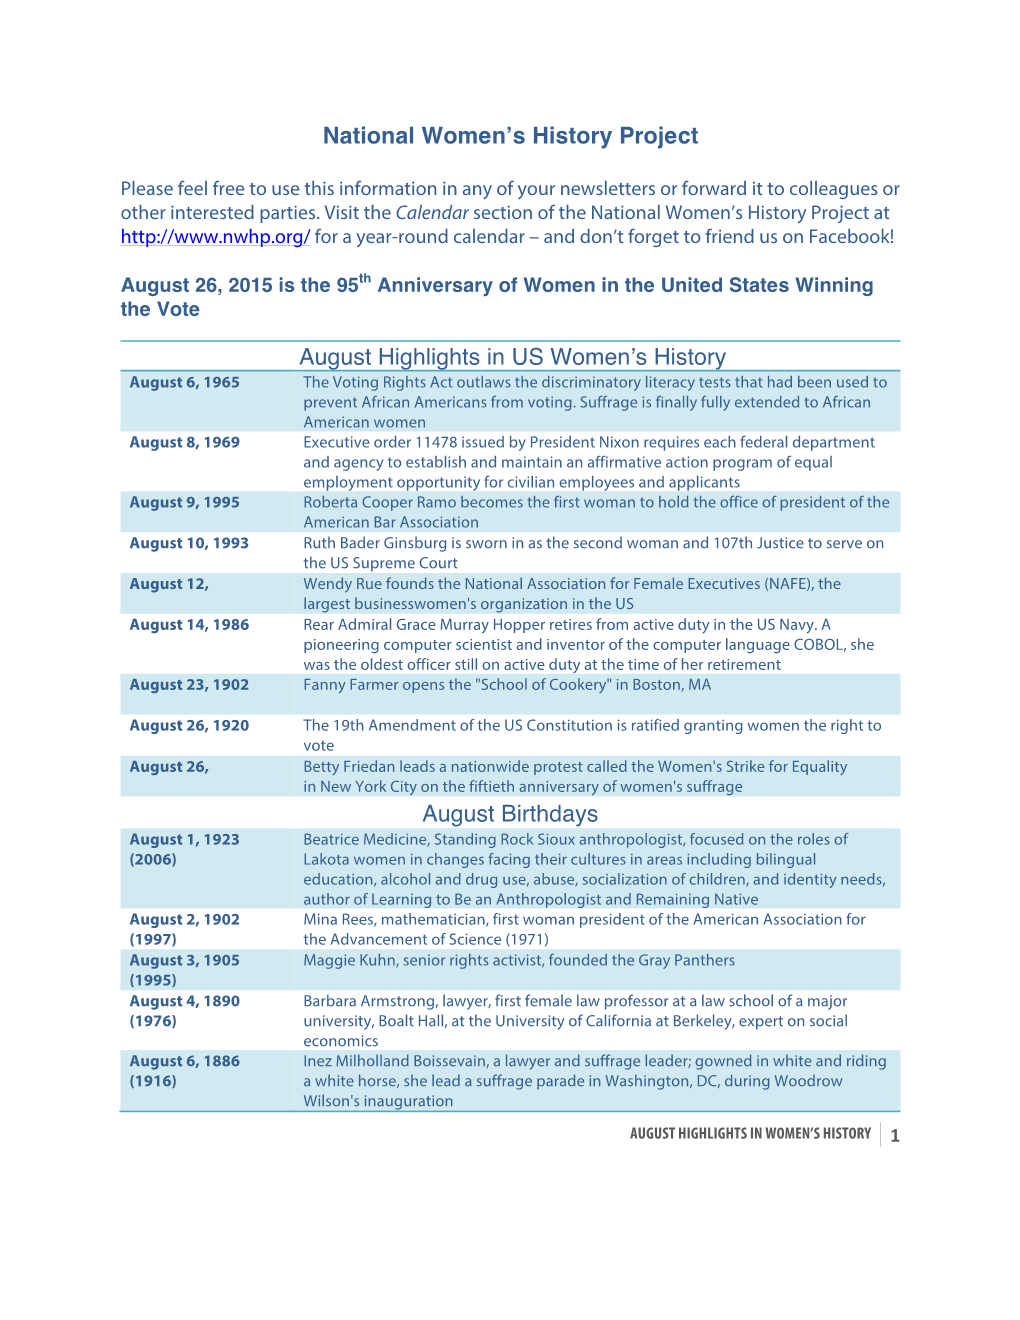 August Highlights in Women's History